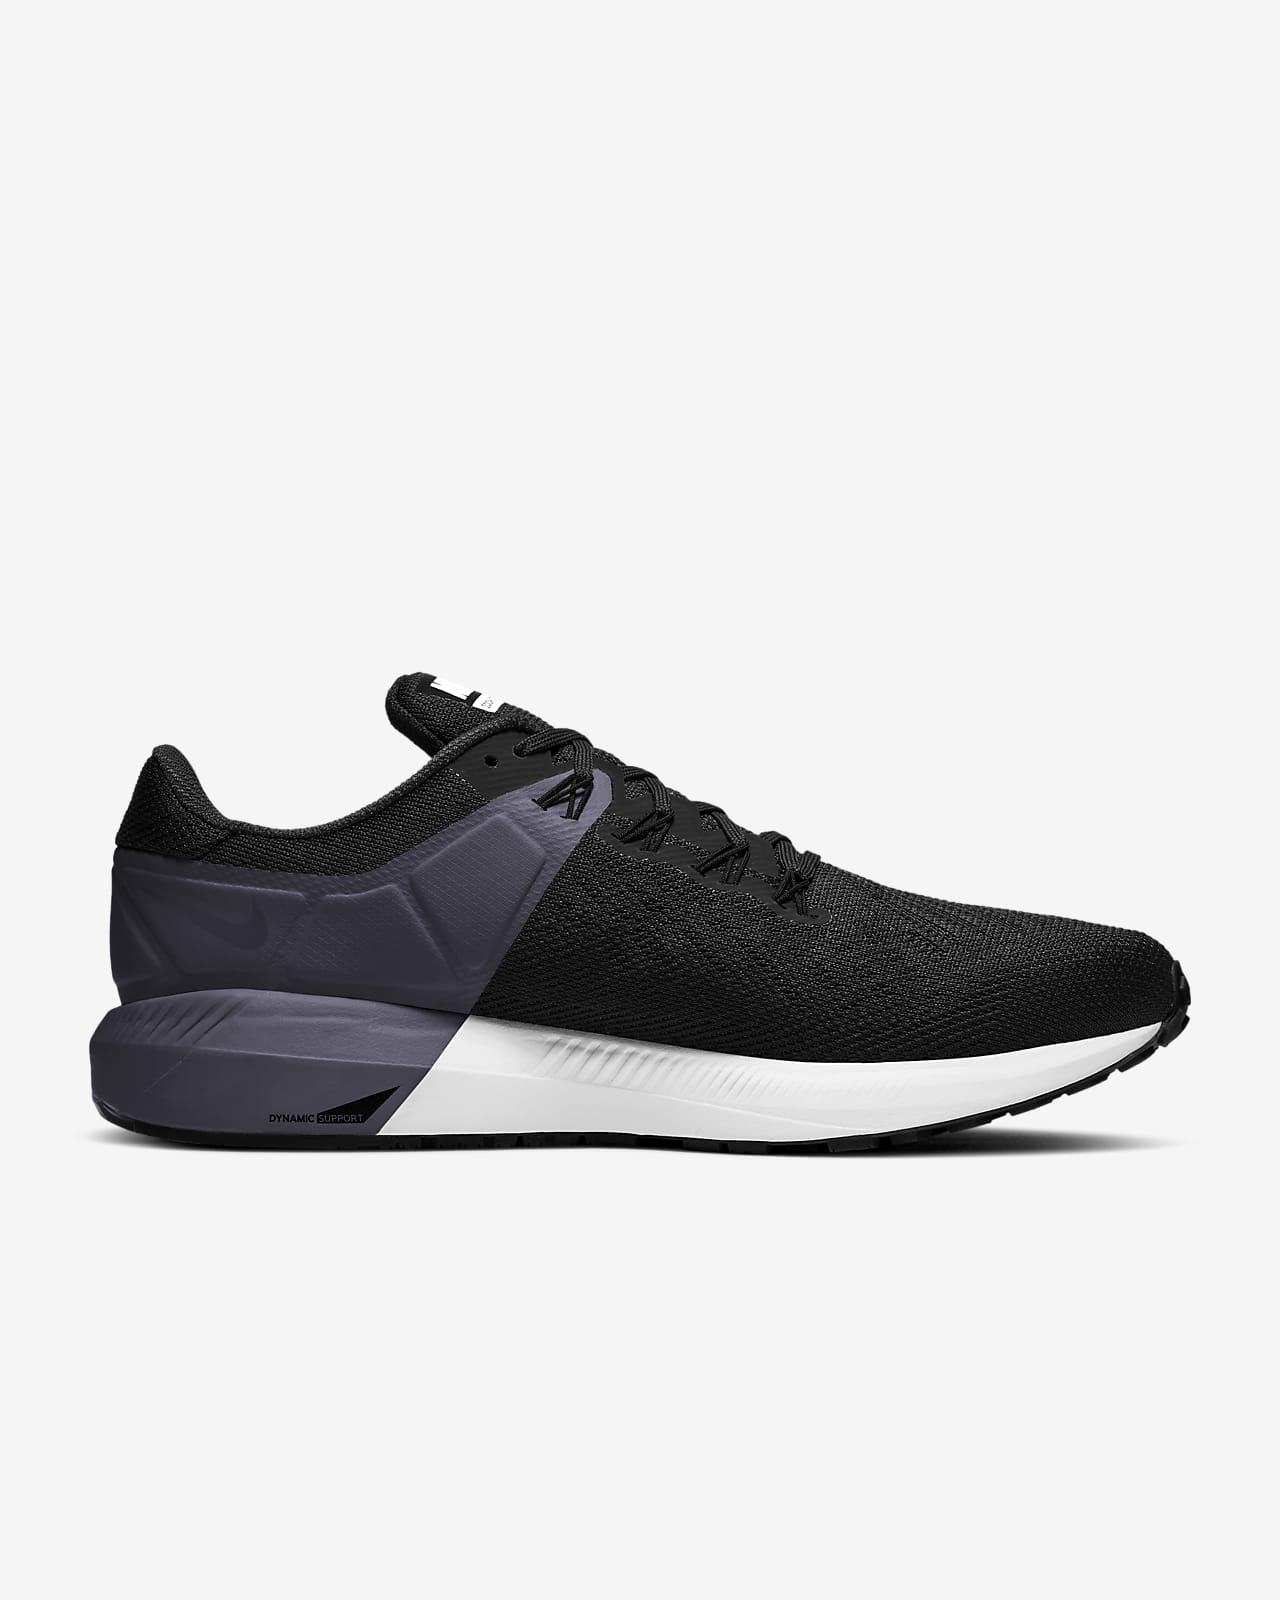 nike dynamic support shoes price